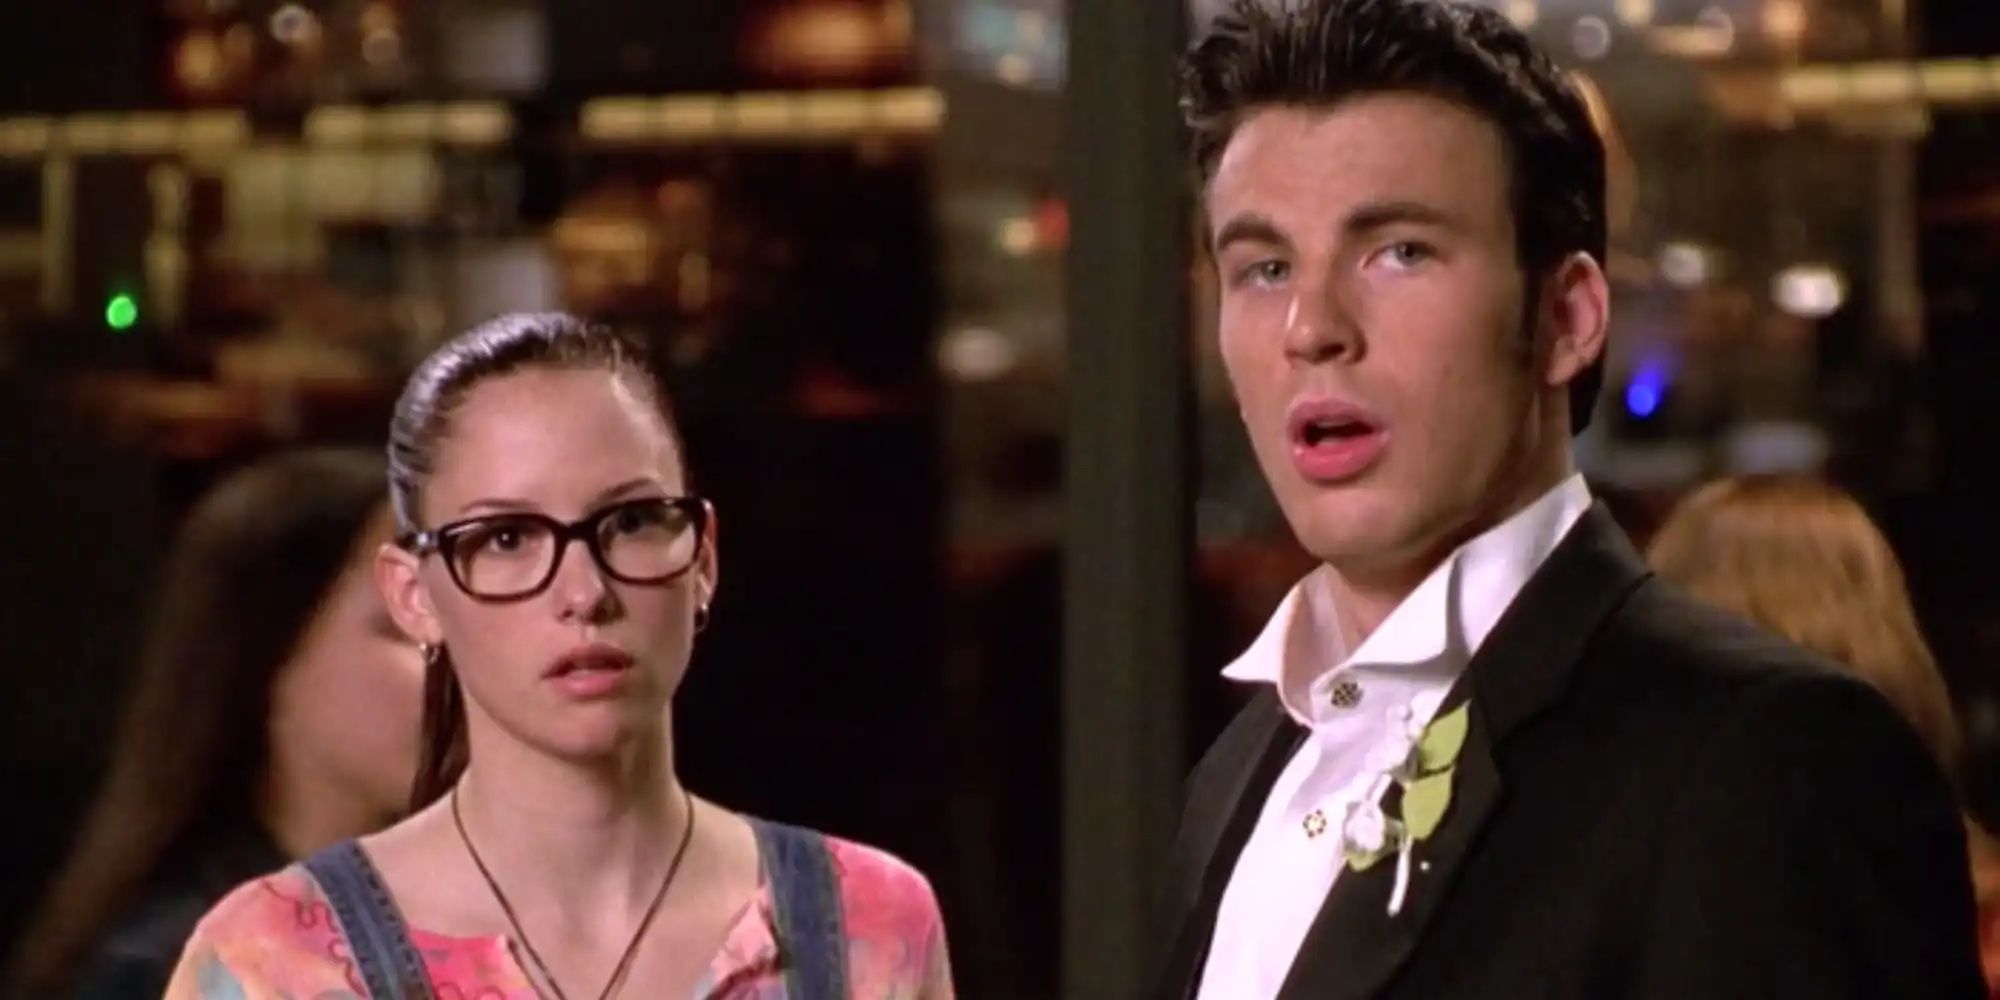 Chyler Leigh and Chris Evans in Not Another Teen Movie